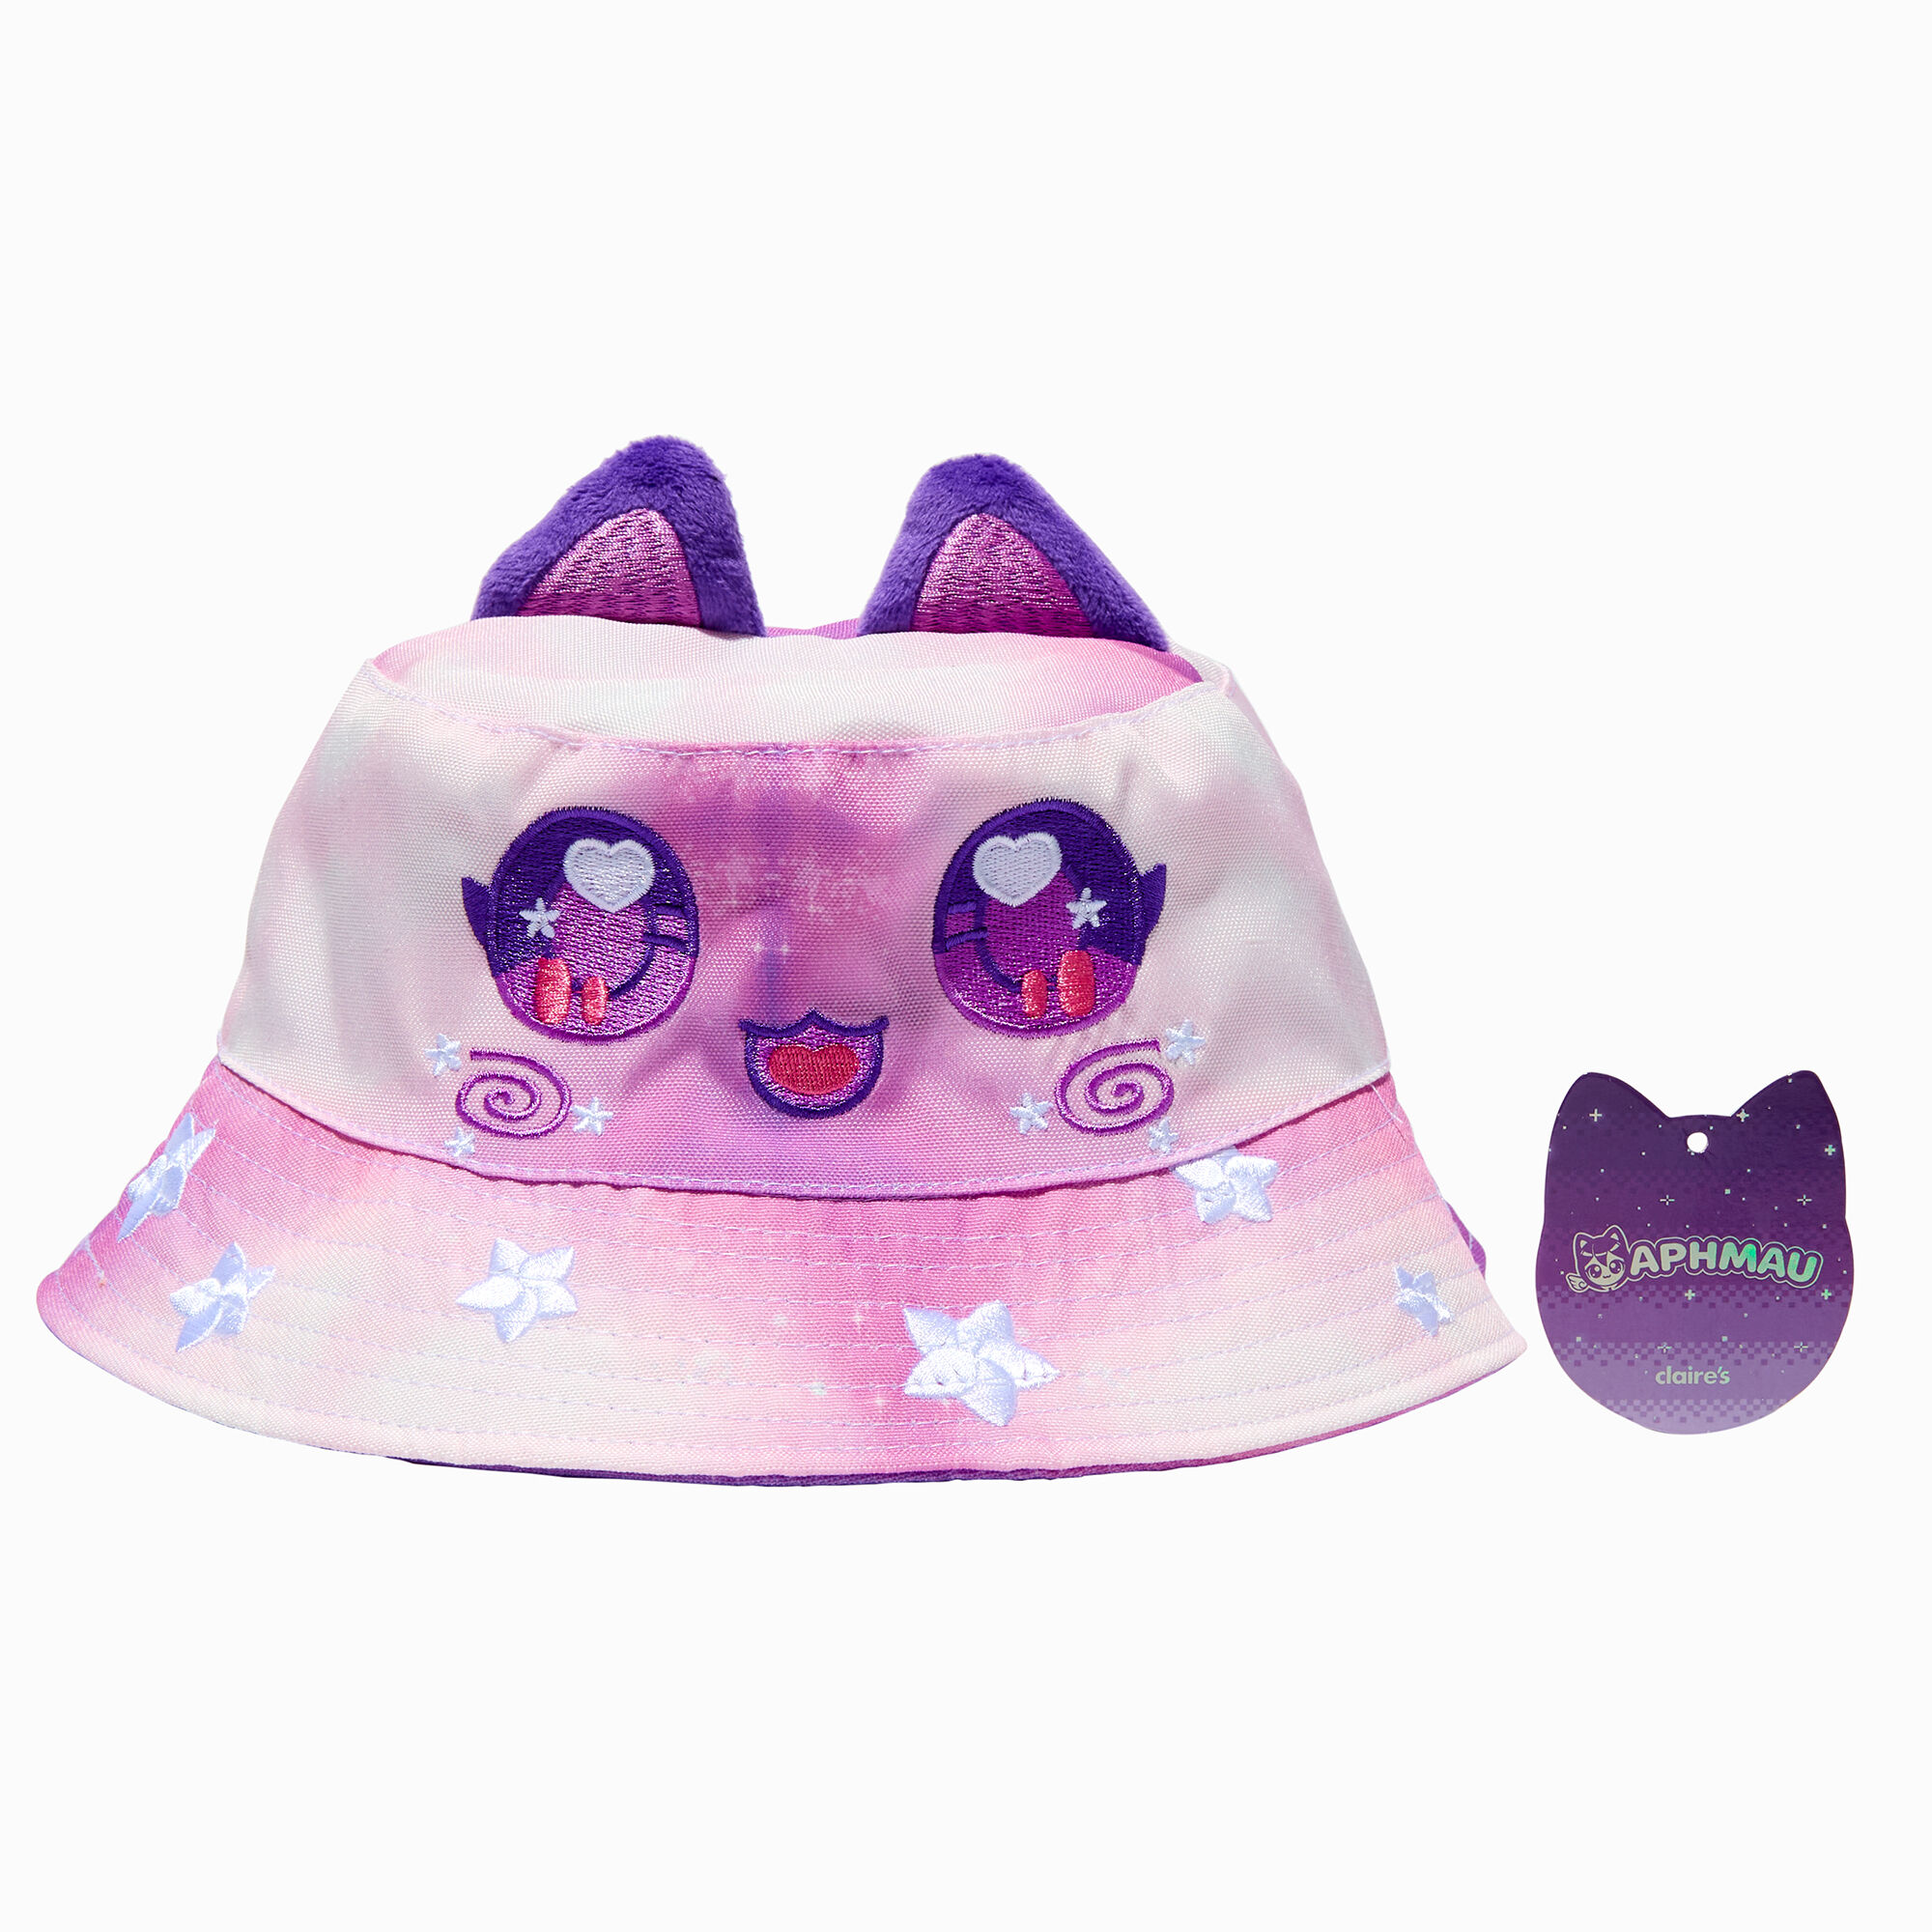 View Aphmau Claires Exclusive Galaxy Cat Bucket Hat information